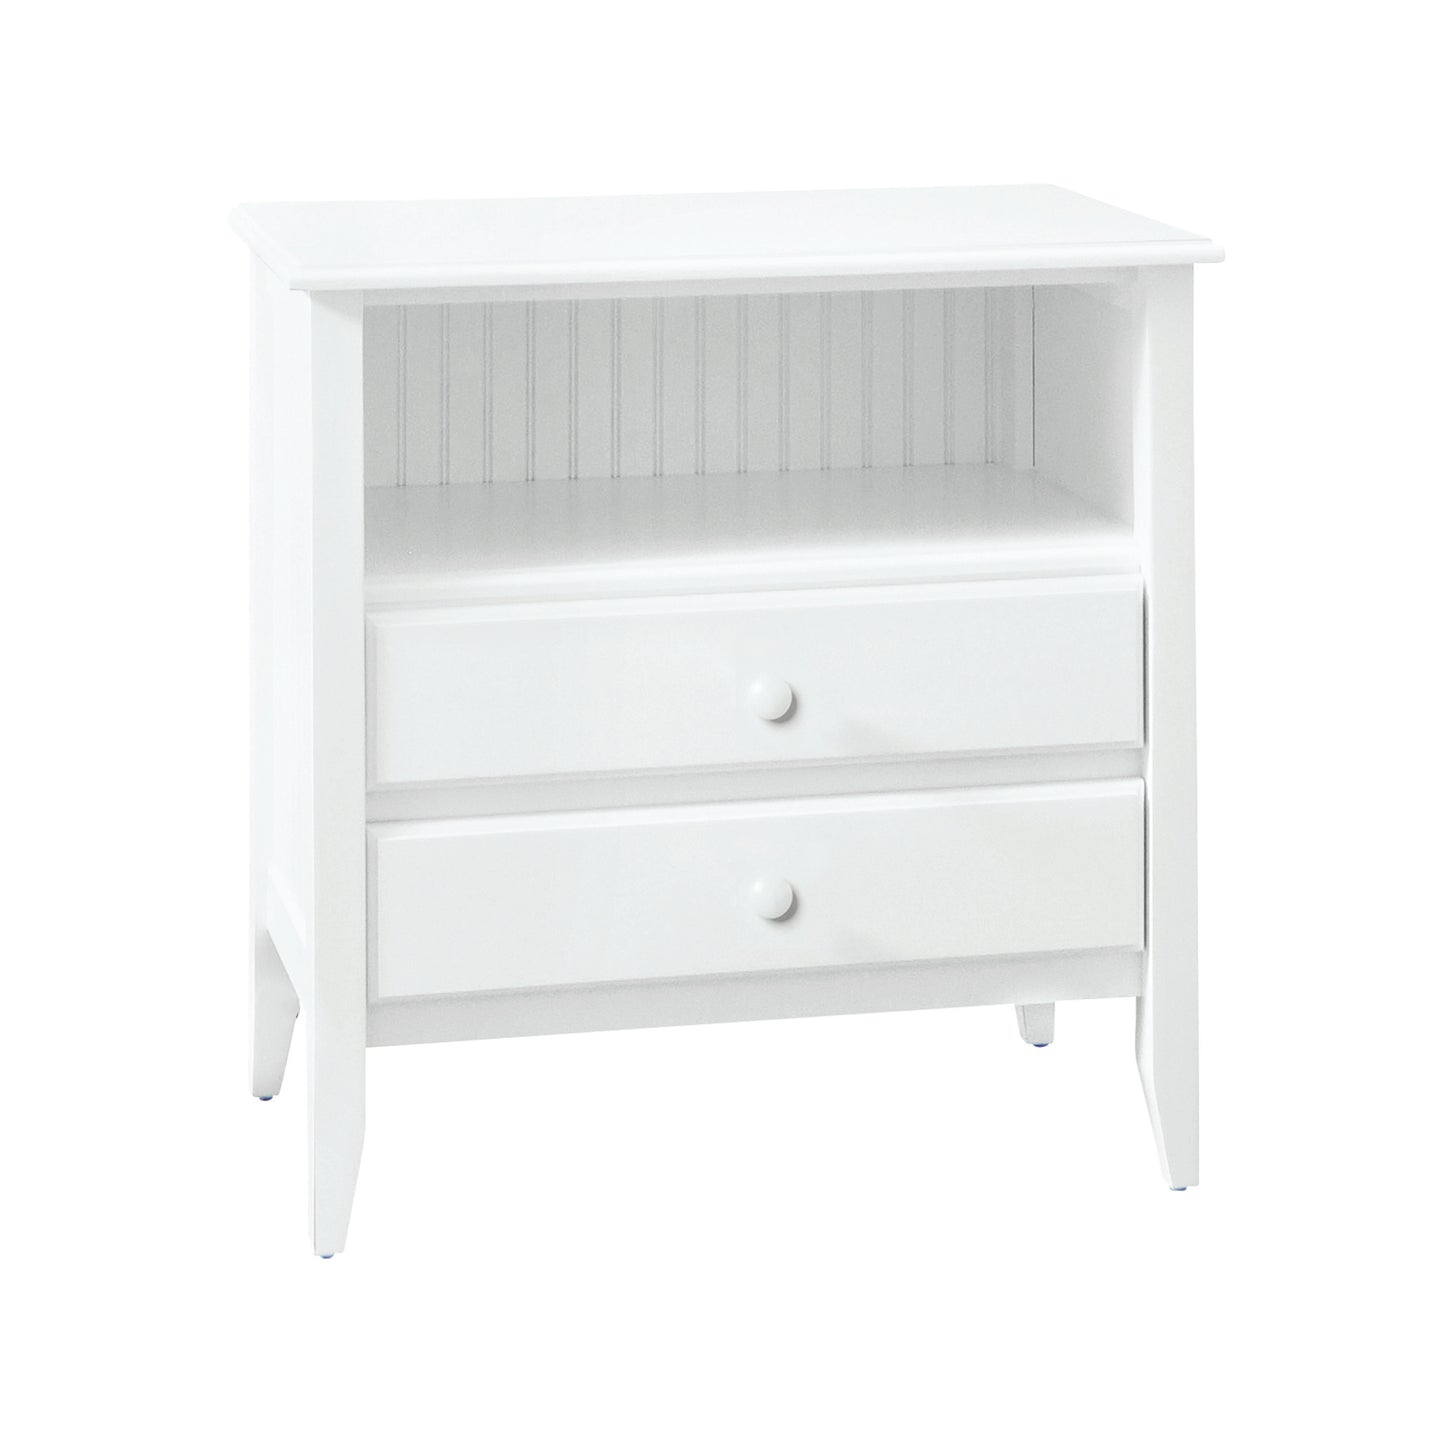 2-Drawer Open Top Bedside Chest -- RFD